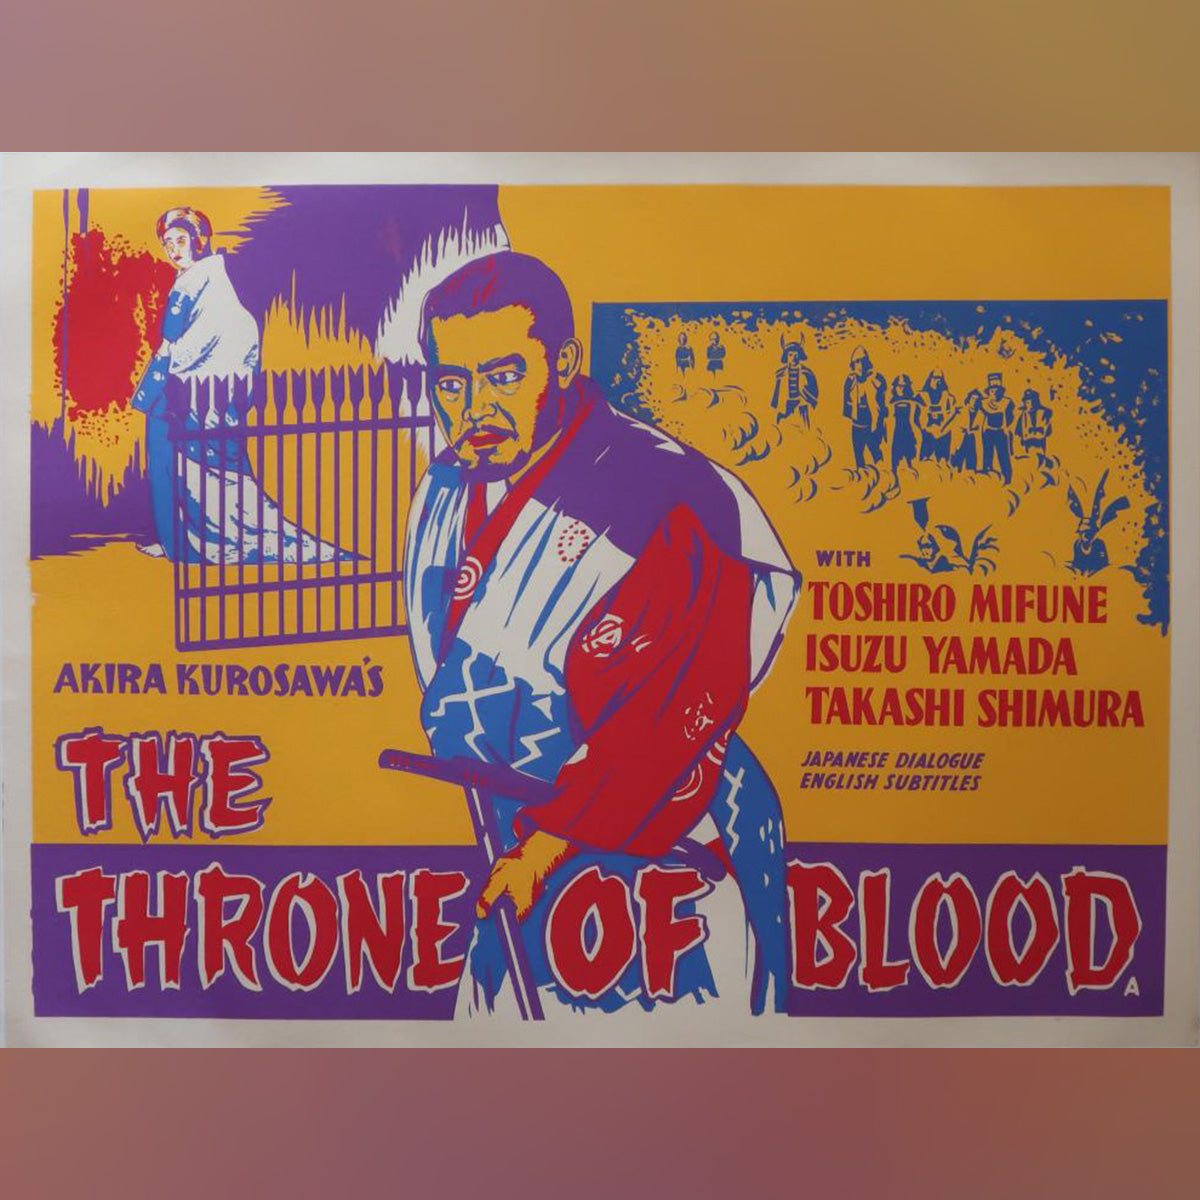 Original Movie Poster of Throne Of Blood (1957)